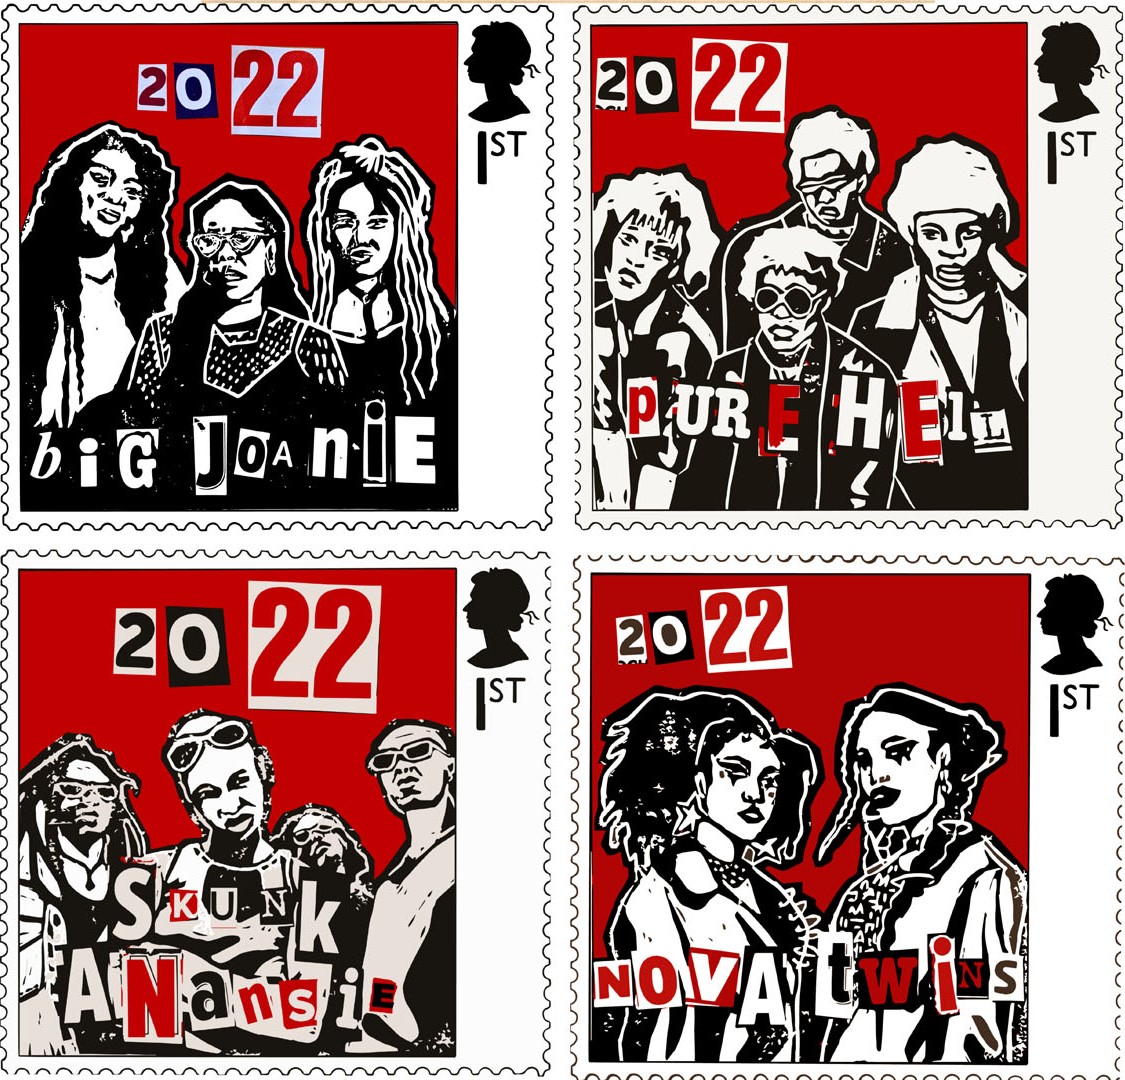 Four designs for punk music stamps